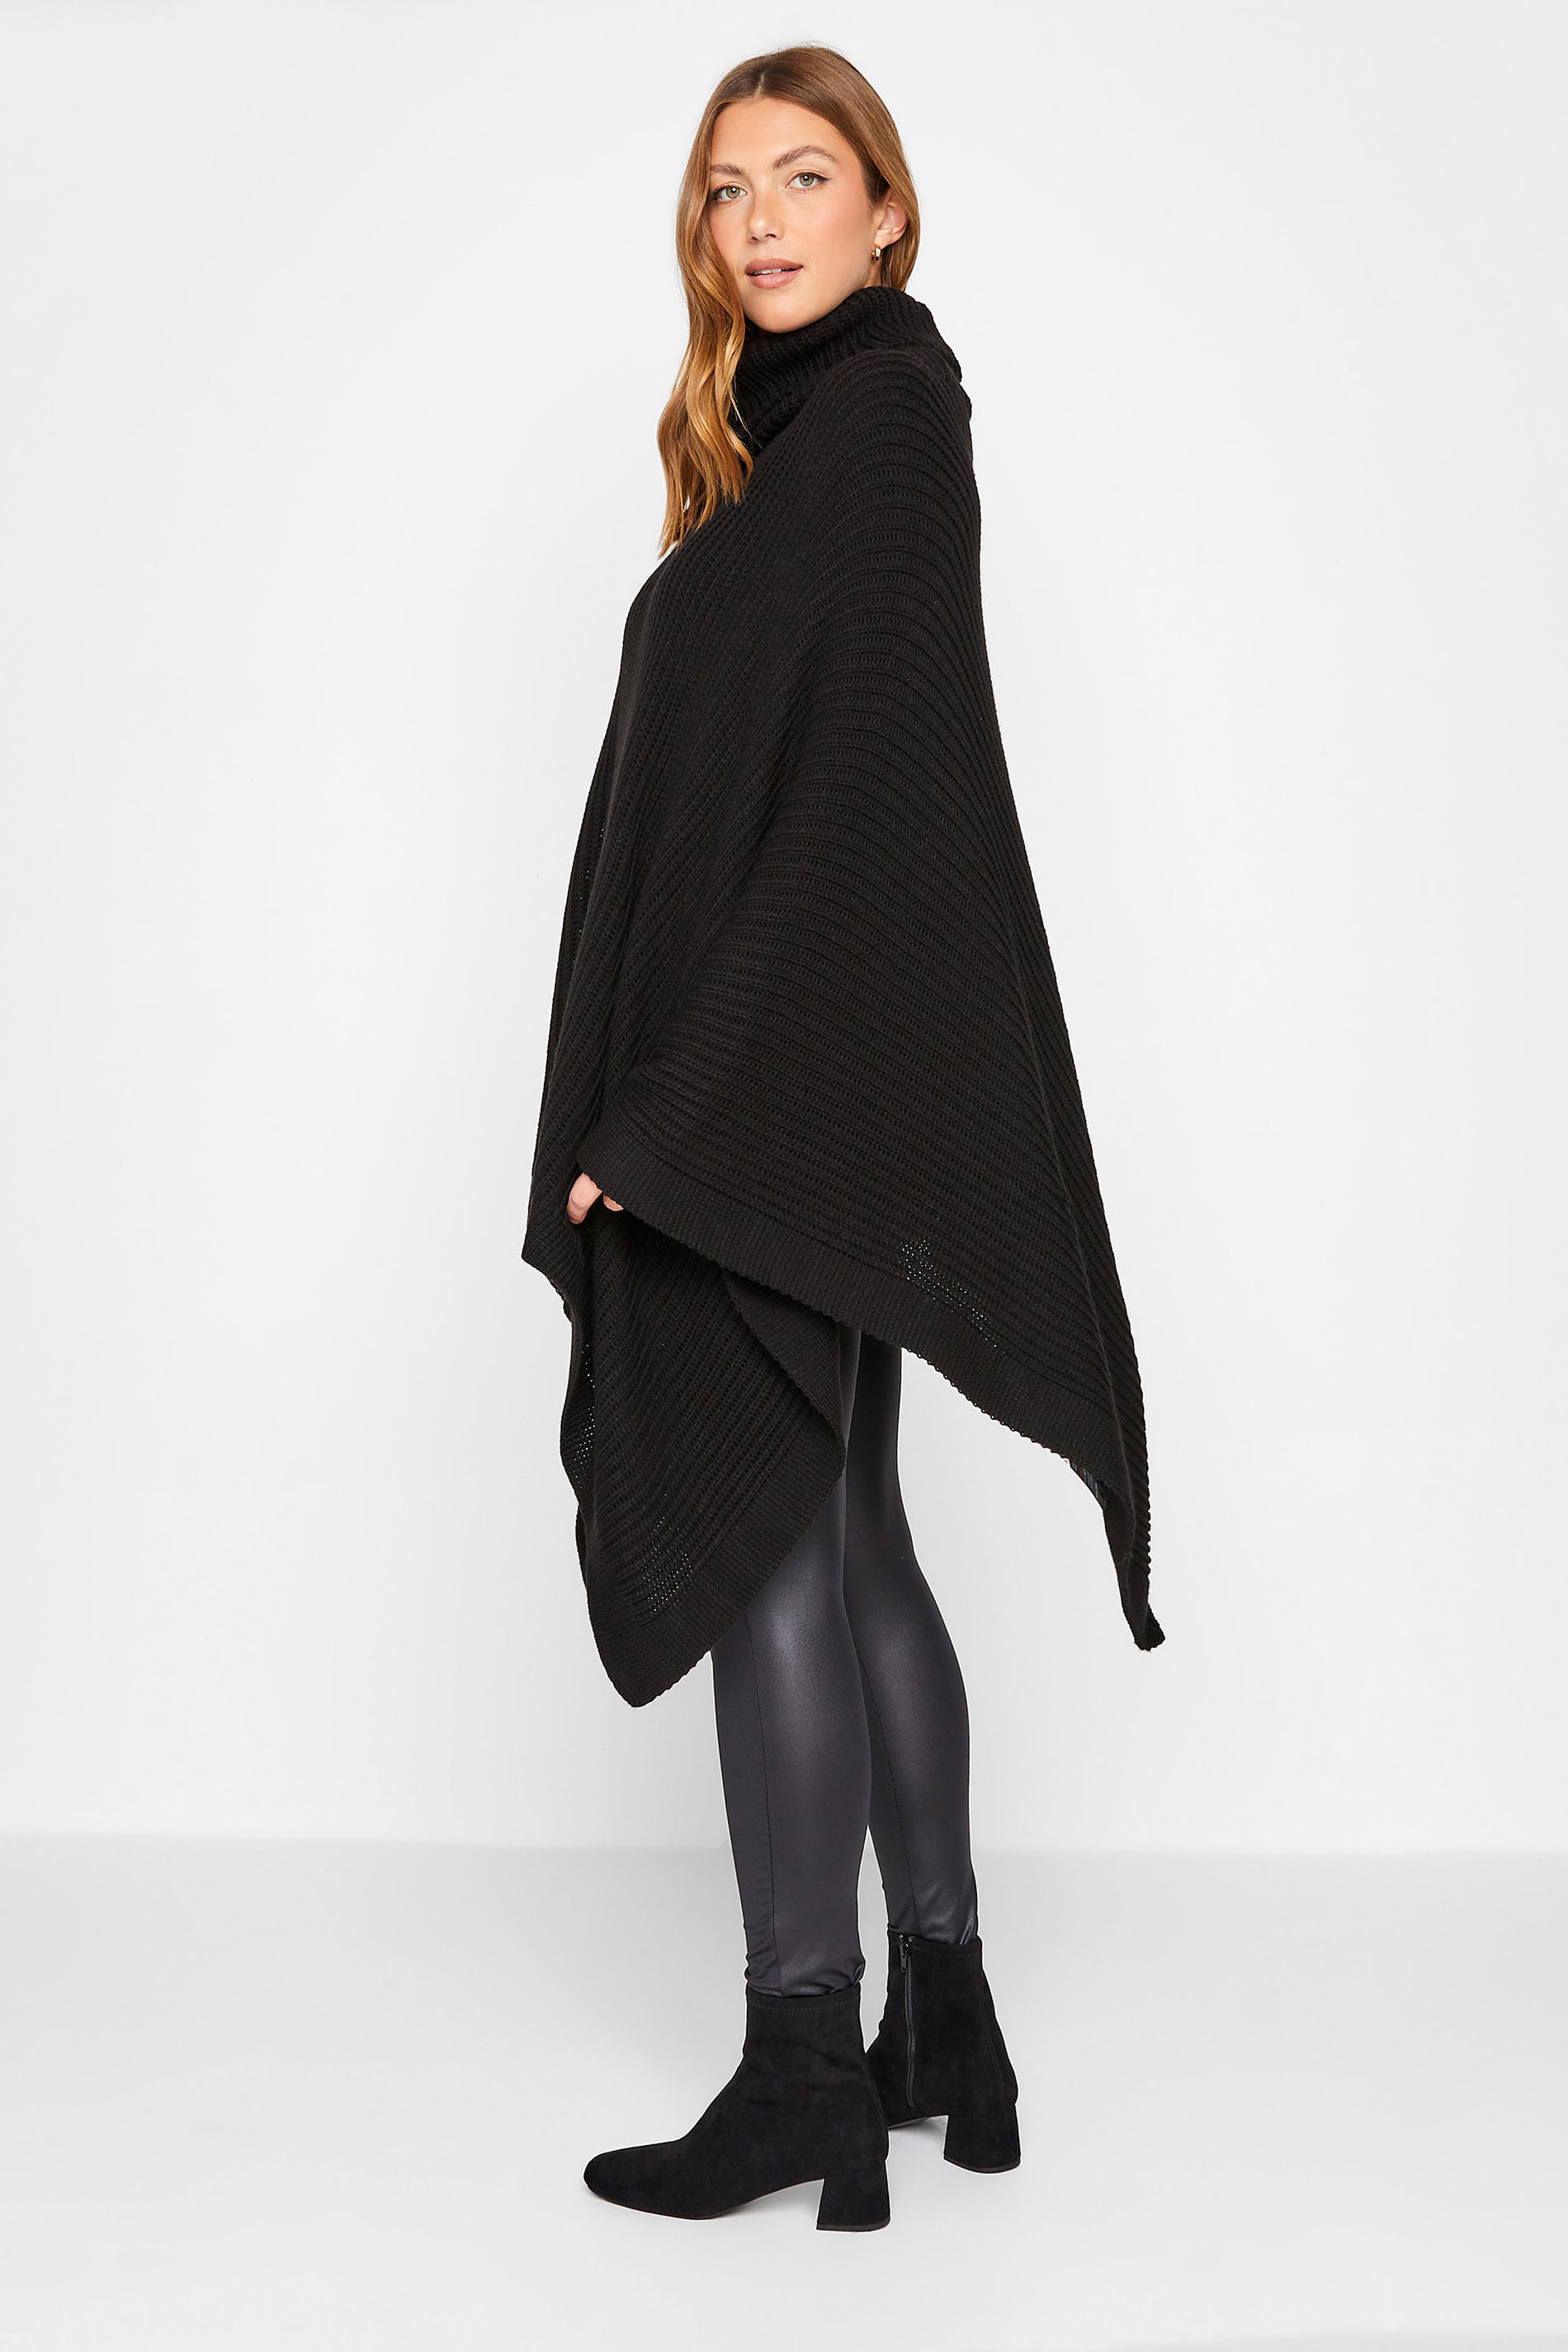 LTS Tall Women's Black Roll Neck Knitted Poncho | Long Tall Sally 1